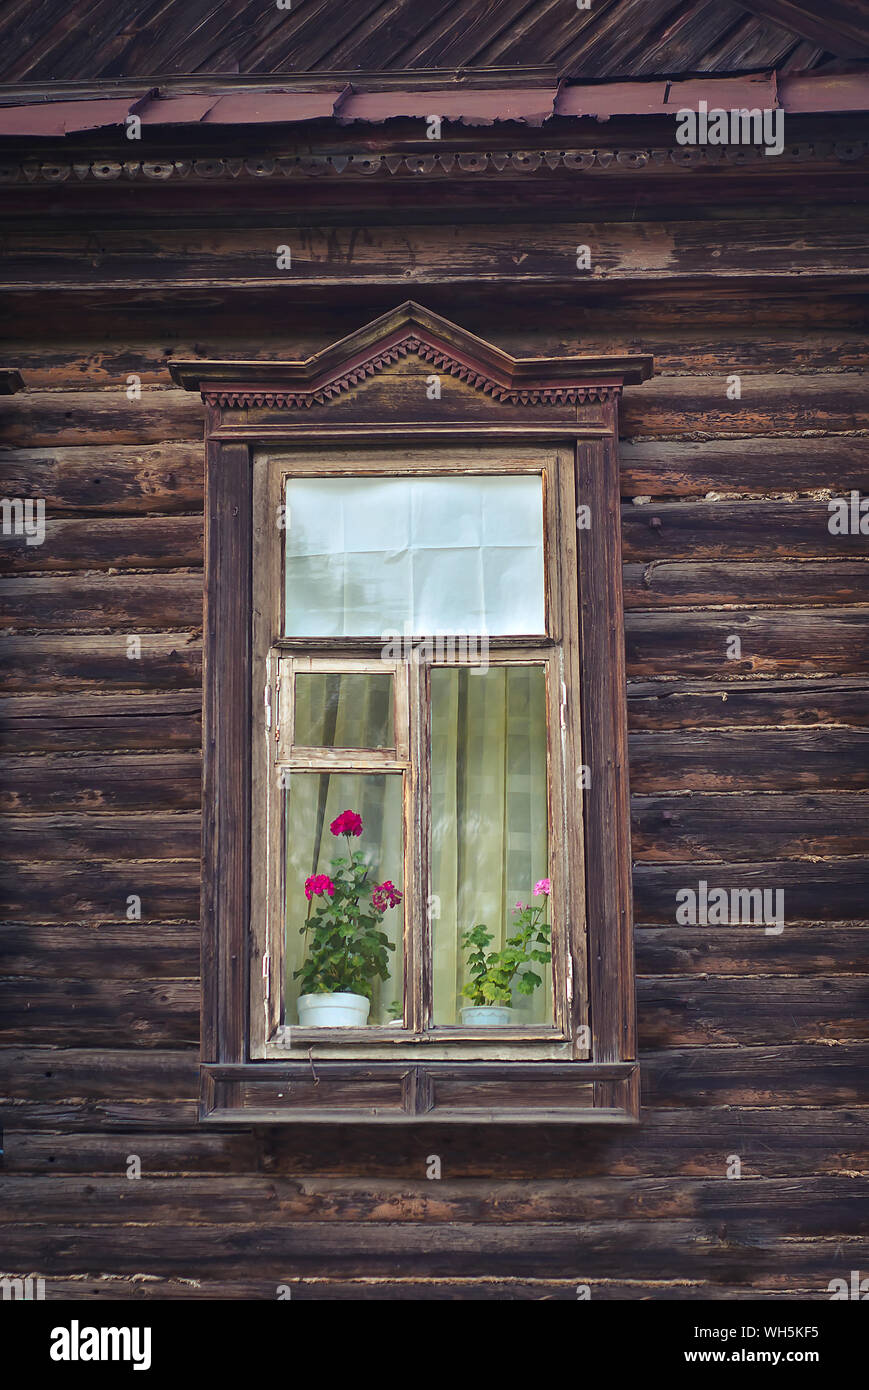 Window with flower in an old wooden house in Russia Stock Photo